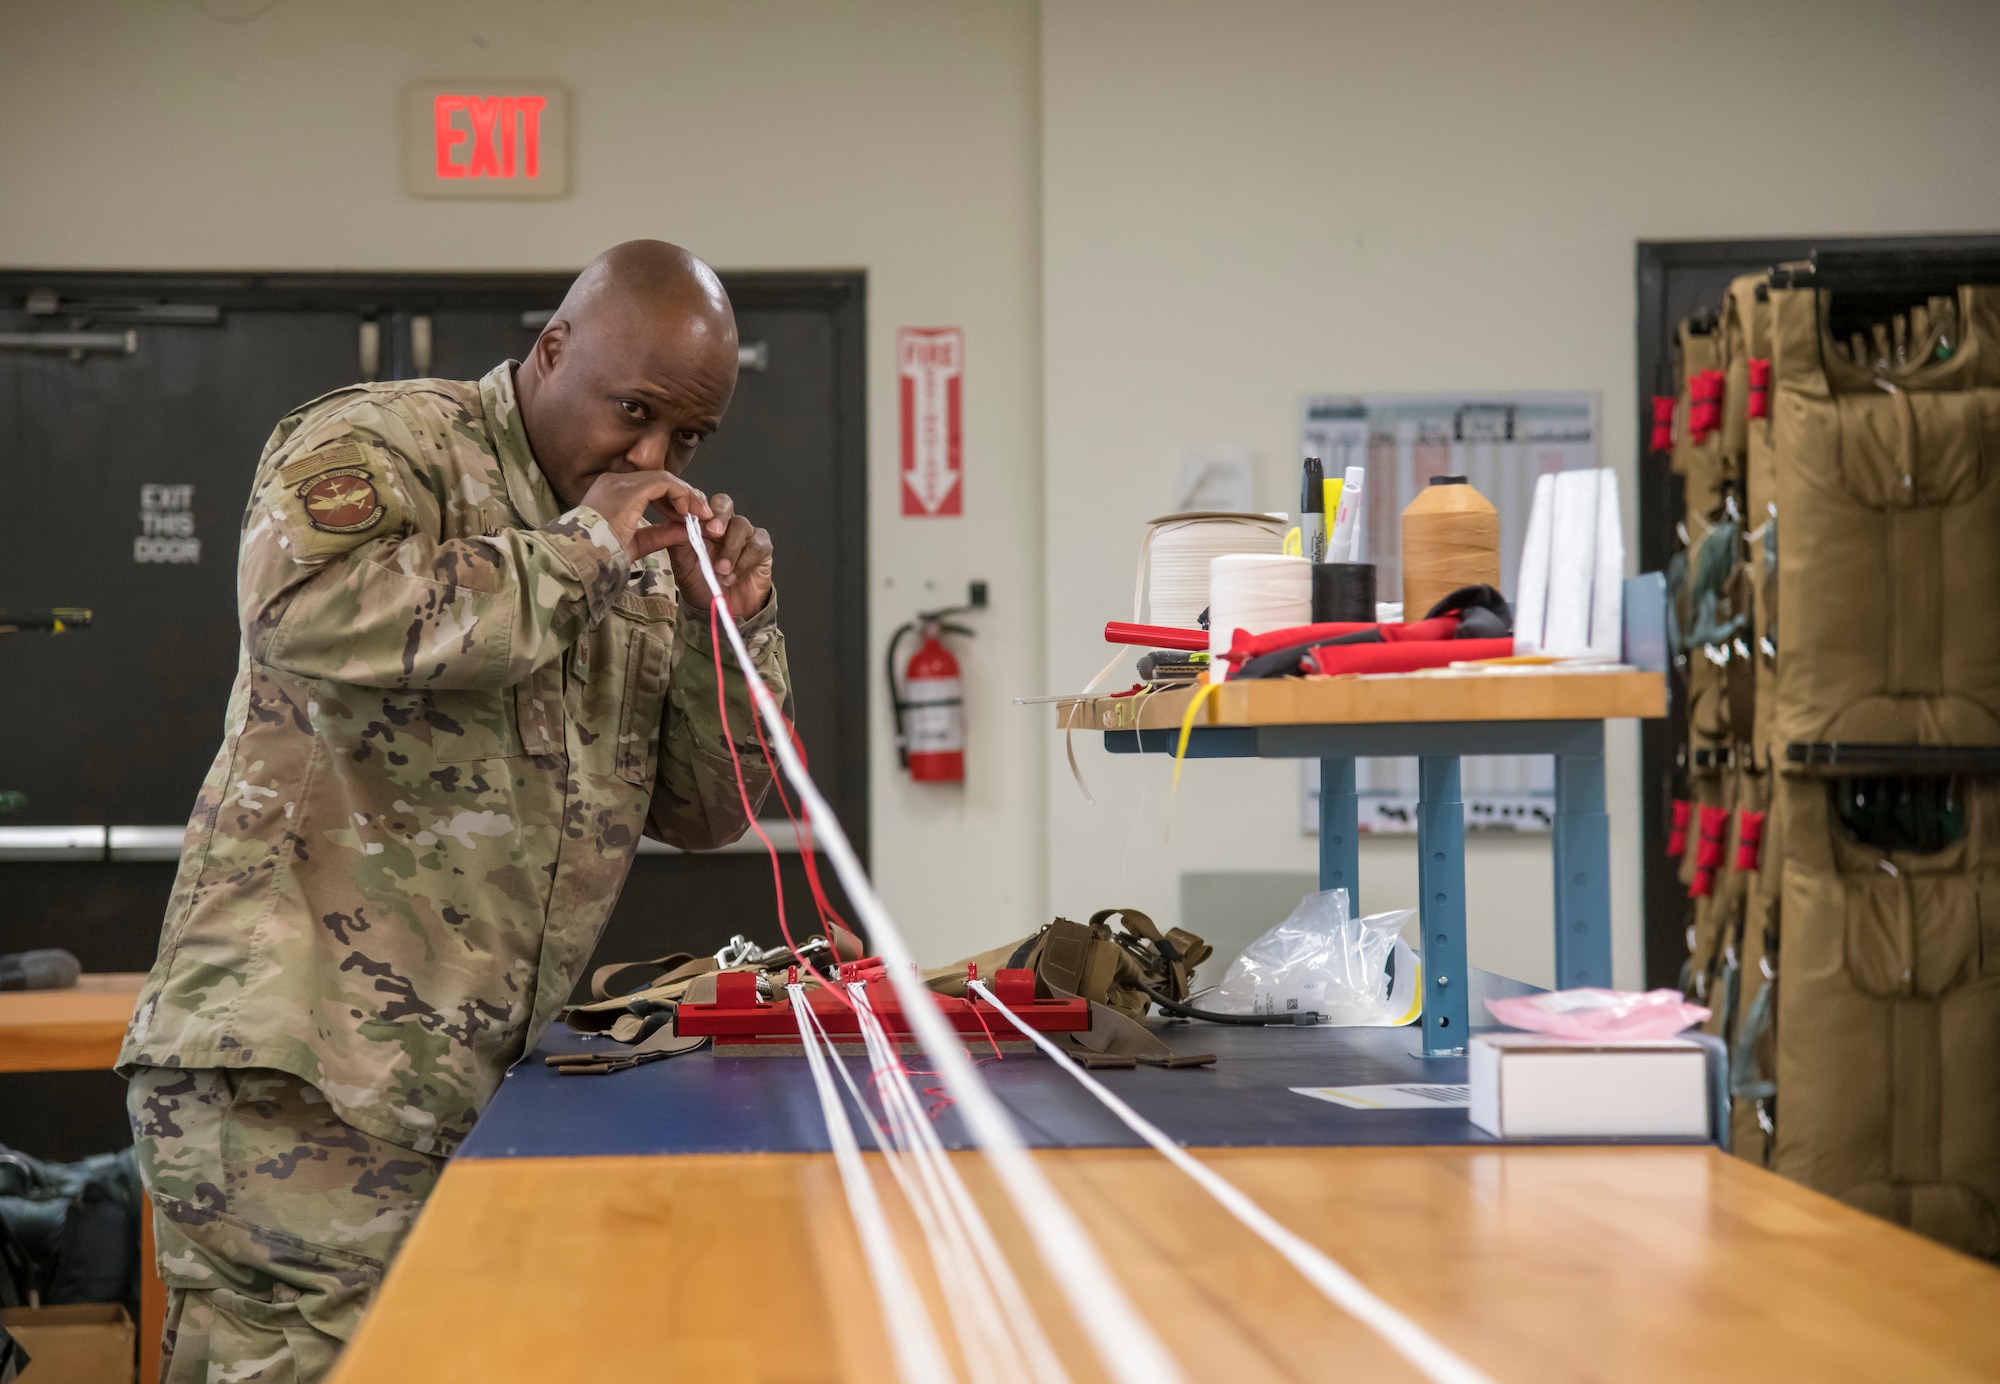 Tech. Sgt. Tyree Leverette, an aircrew flight equipment technician for the 403rd Operational Support Squadron at Keesler Air Force Base, Miss., unwinds the cords of a BA-30 Low Profile Parachute system before packing it May 2, 2021. The new parachute systems, in addition to being 25% lighter than the outgoing BA-22s, are designed to be less susceptible to accidental deployment.  (U.S. Air Force photo by Staff Sgt. Kristen Pittman)